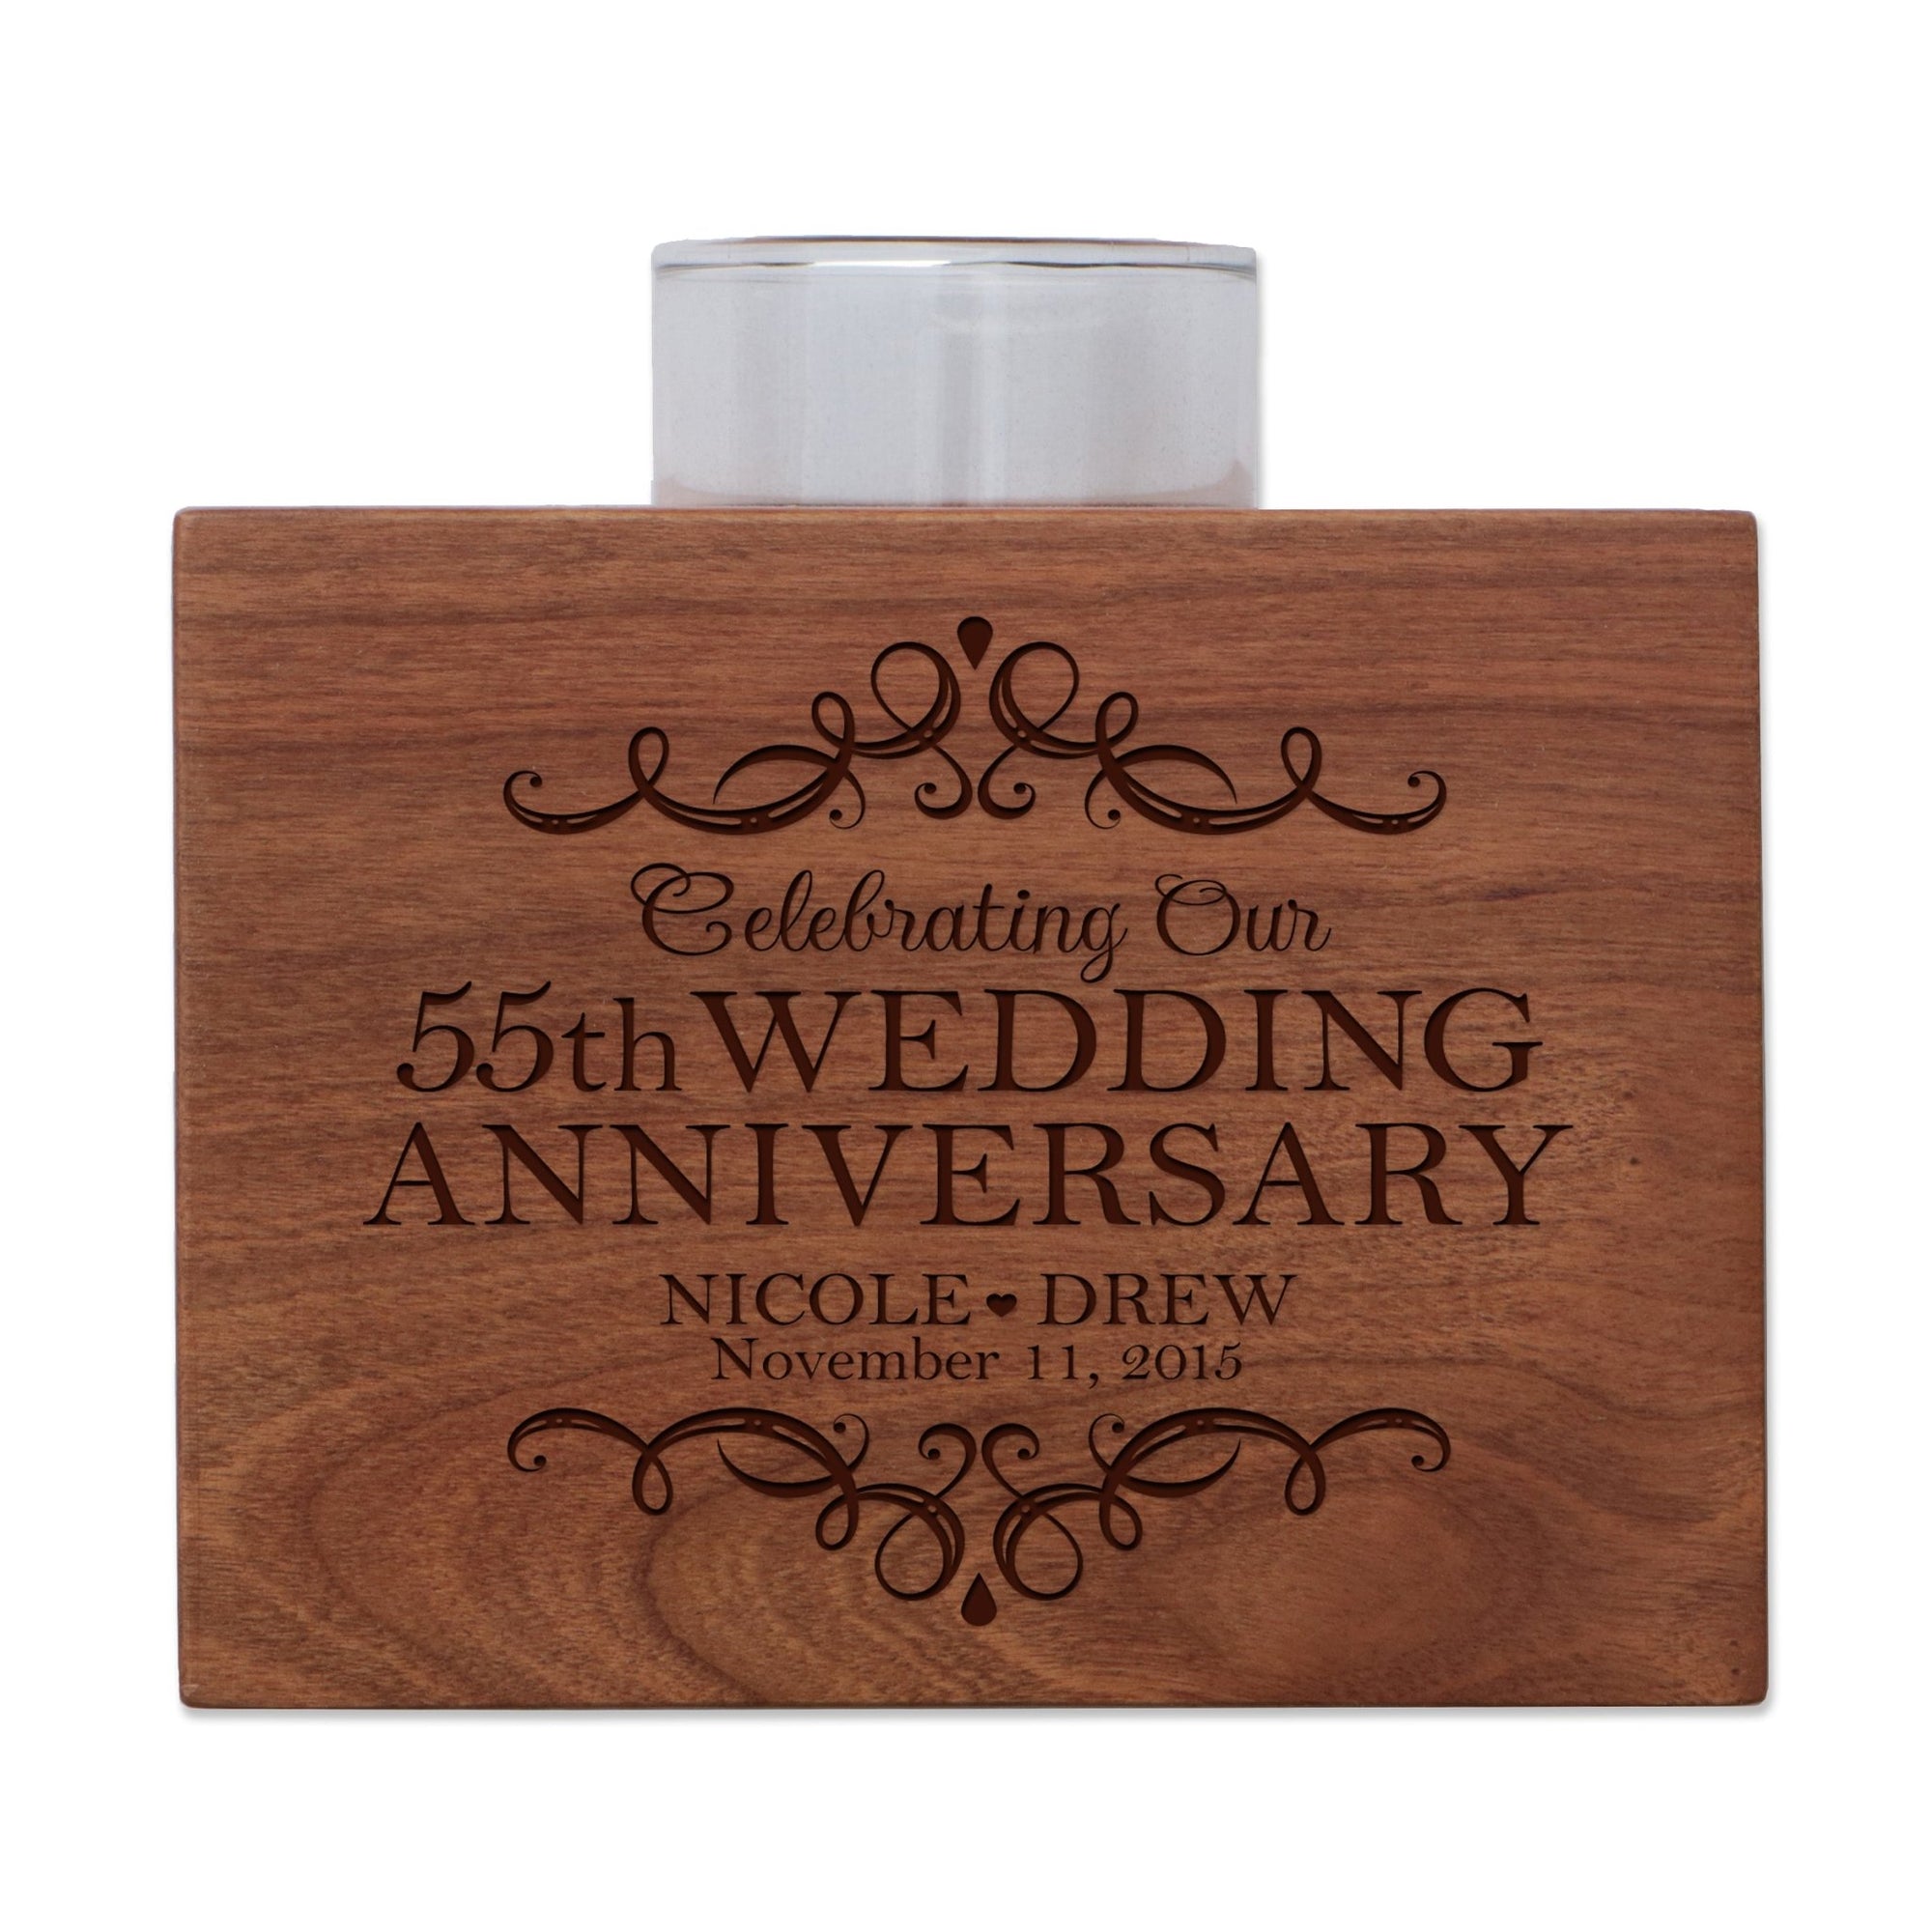 Personalized 55th Anniversary Candle Holder - Celebrating - LifeSong Milestones